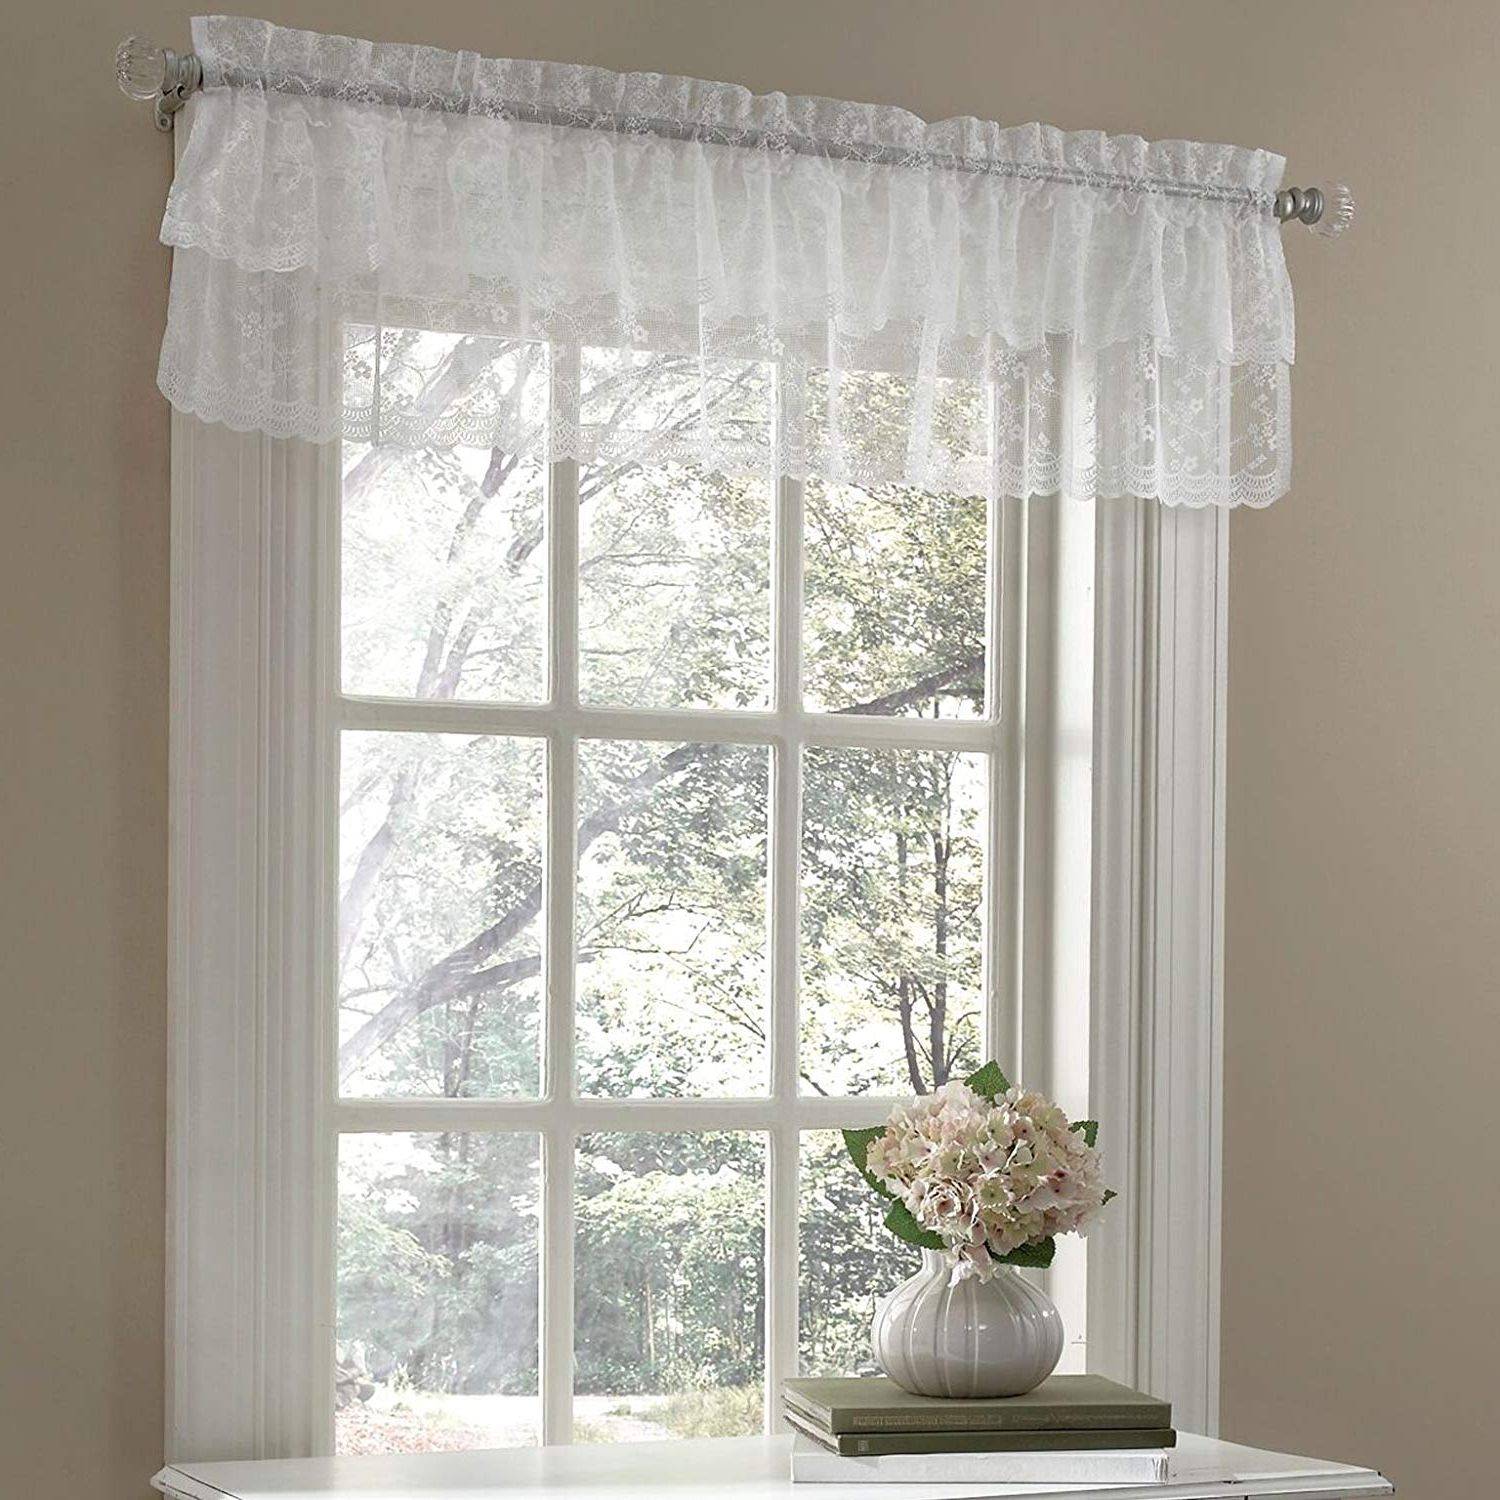 2021 Elegant White Priscilla Lace Kitchen Curtain Pieces With Regard To Amazon: Sweet Home Collection Kitchen Window Tier, Swag (View 9 of 20)